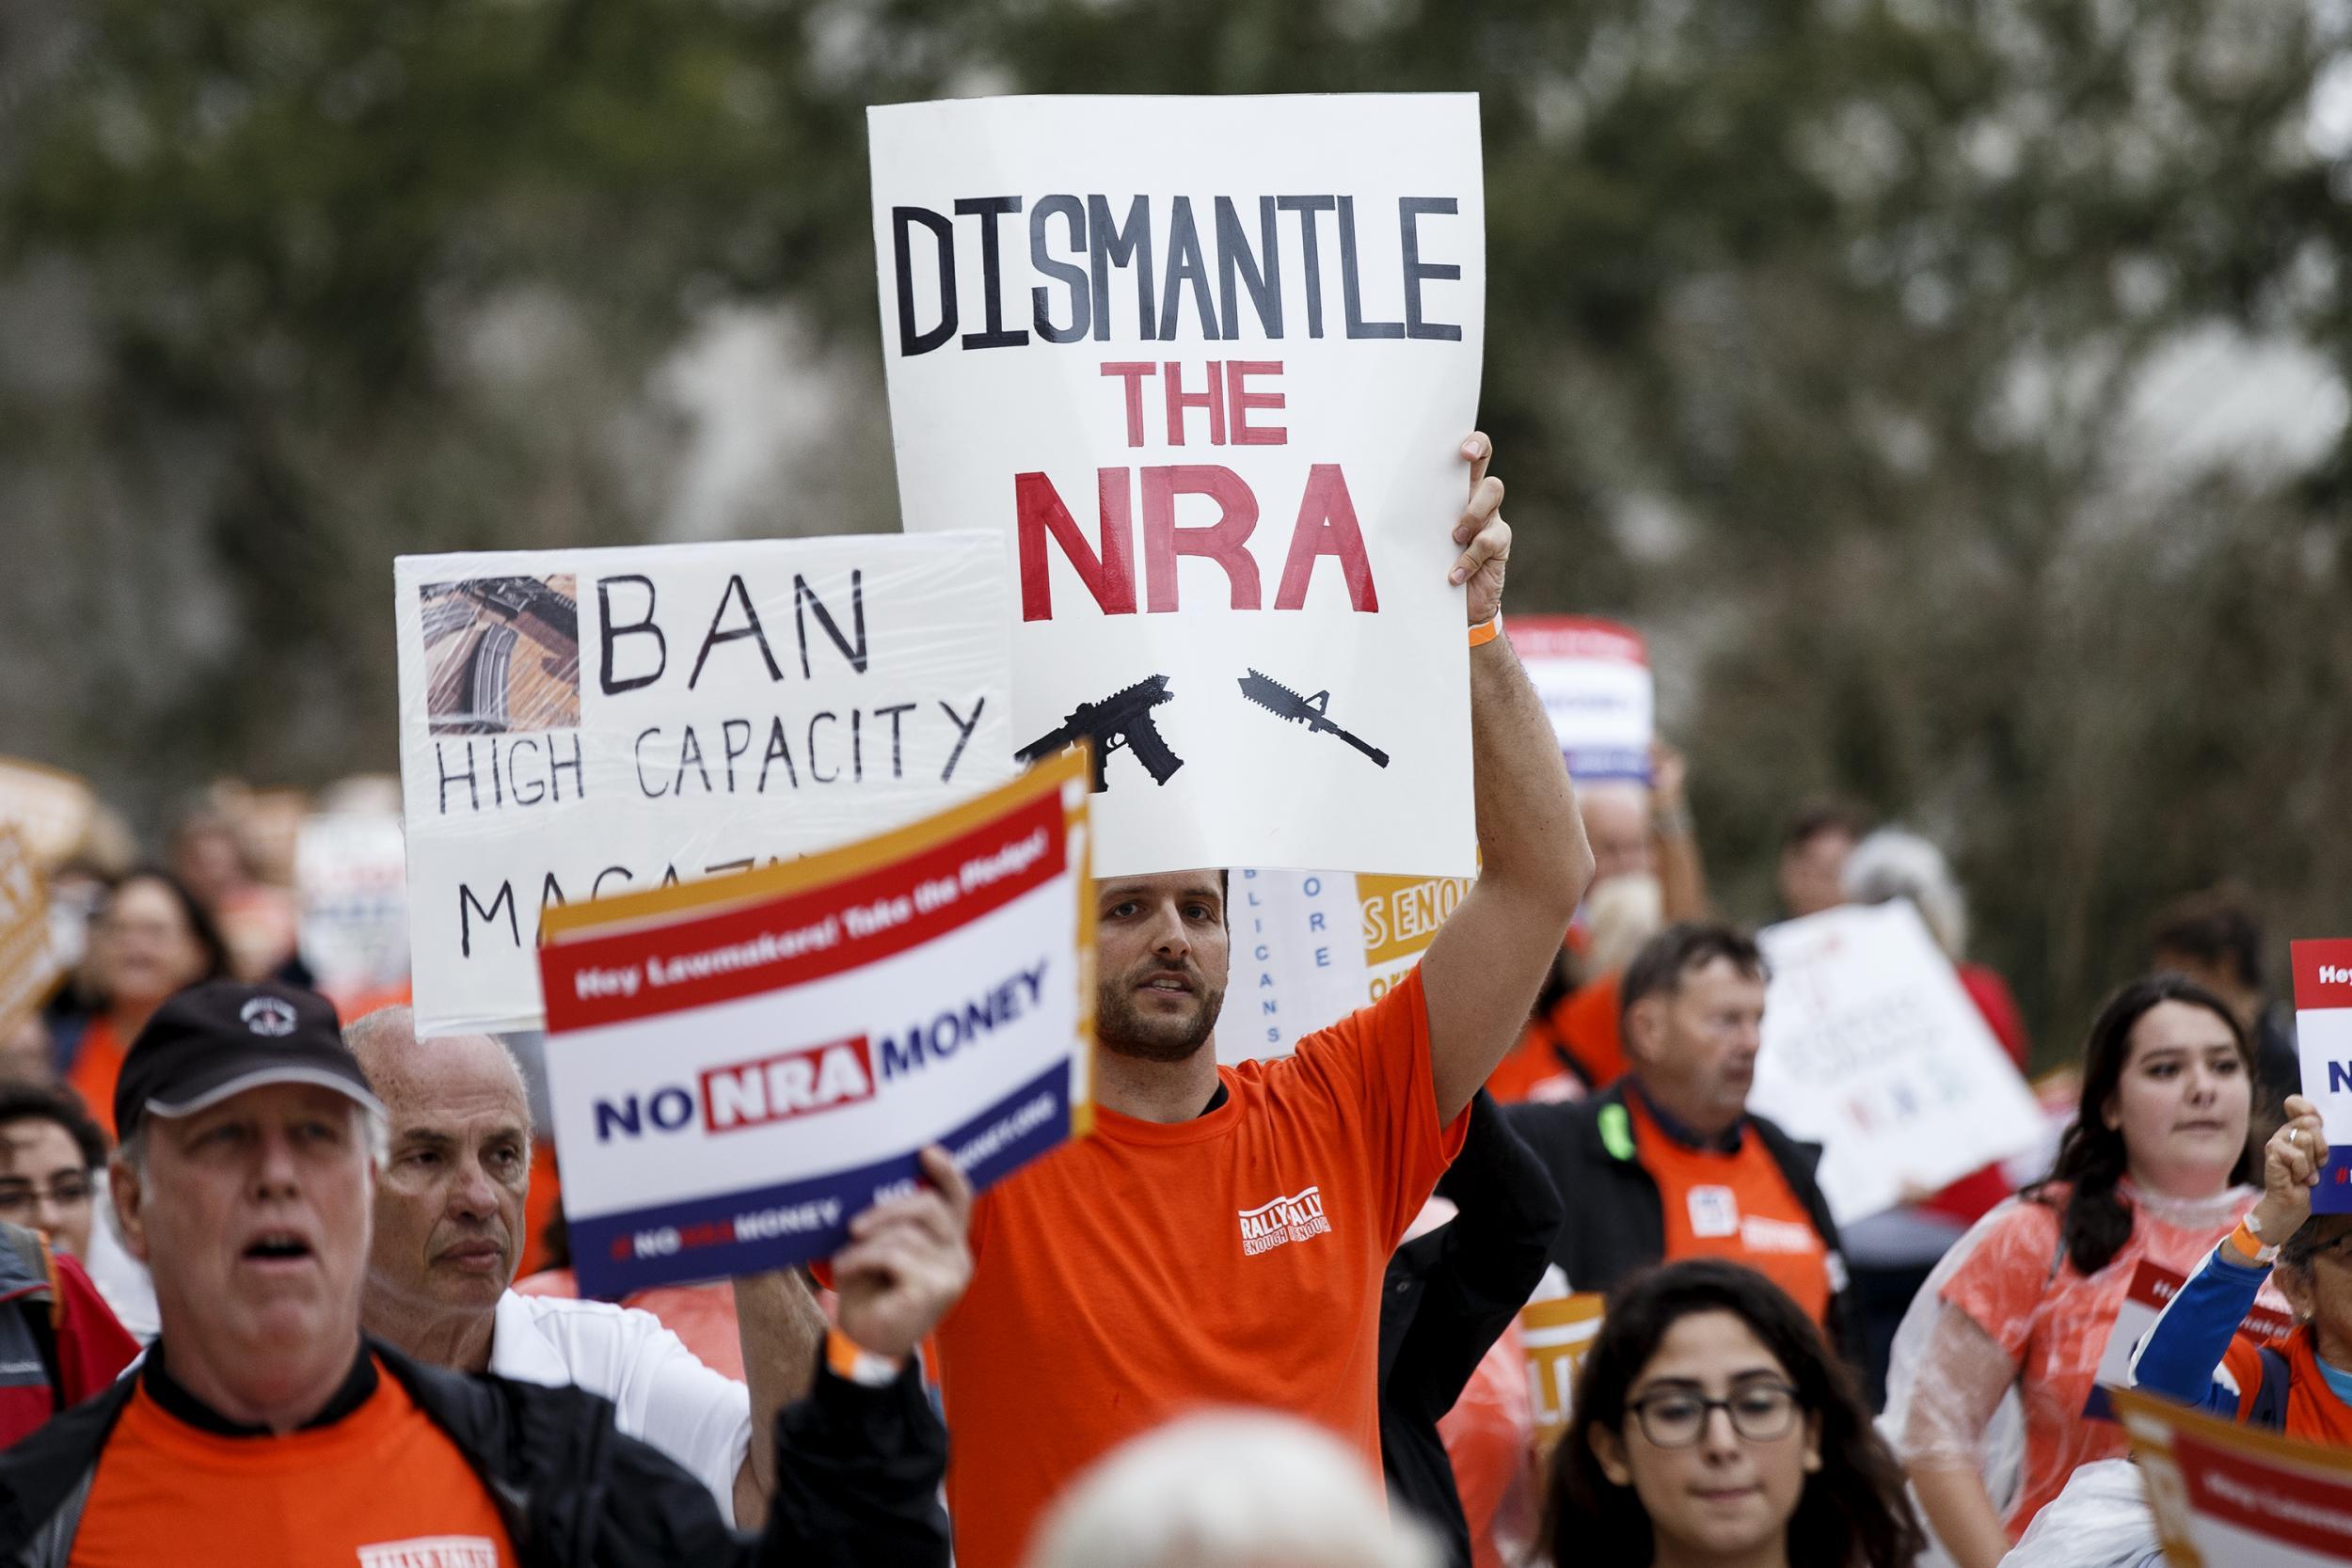 Activists hold up signs at the Florida State Capitol as they rally for gun reform legislation